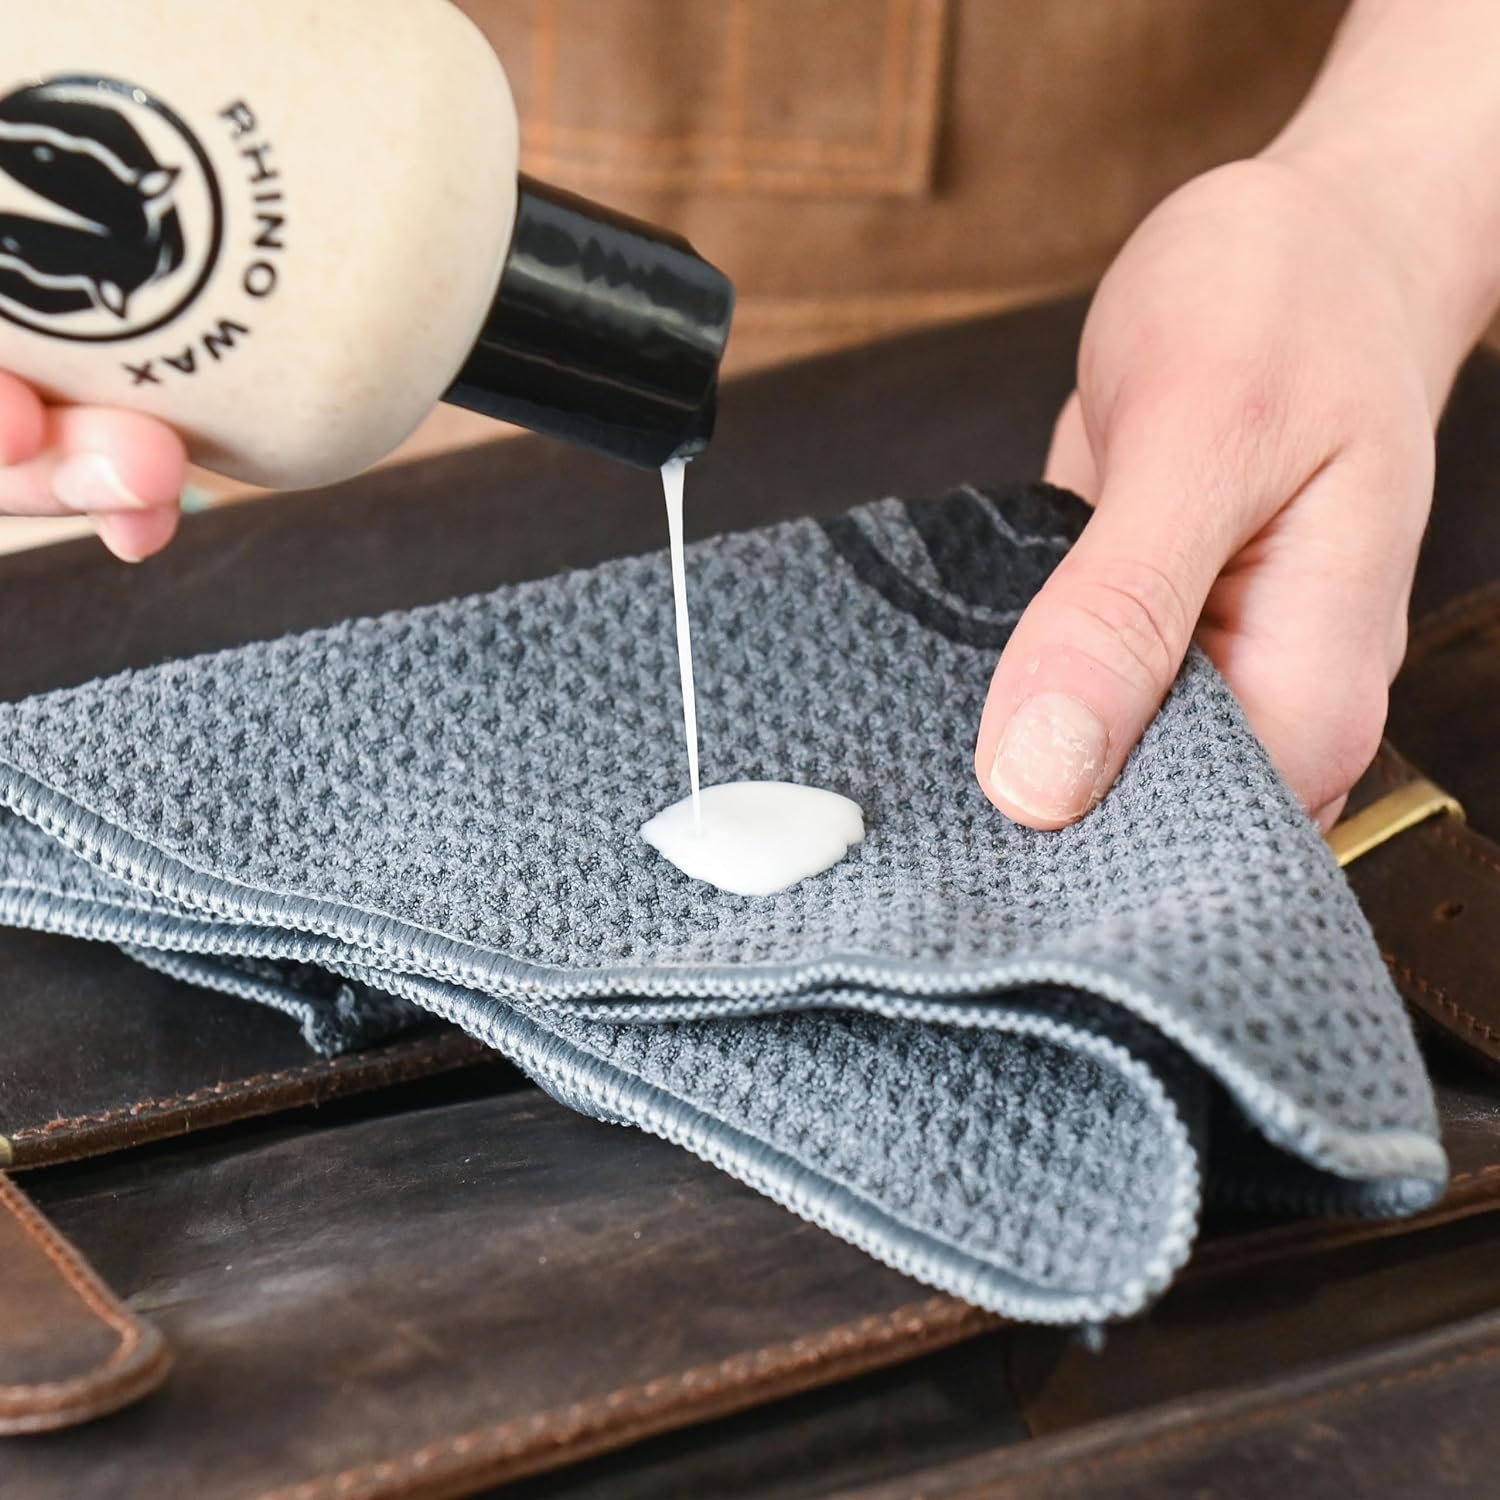 Leather Cleaner Plus Leather Starter Kit Review